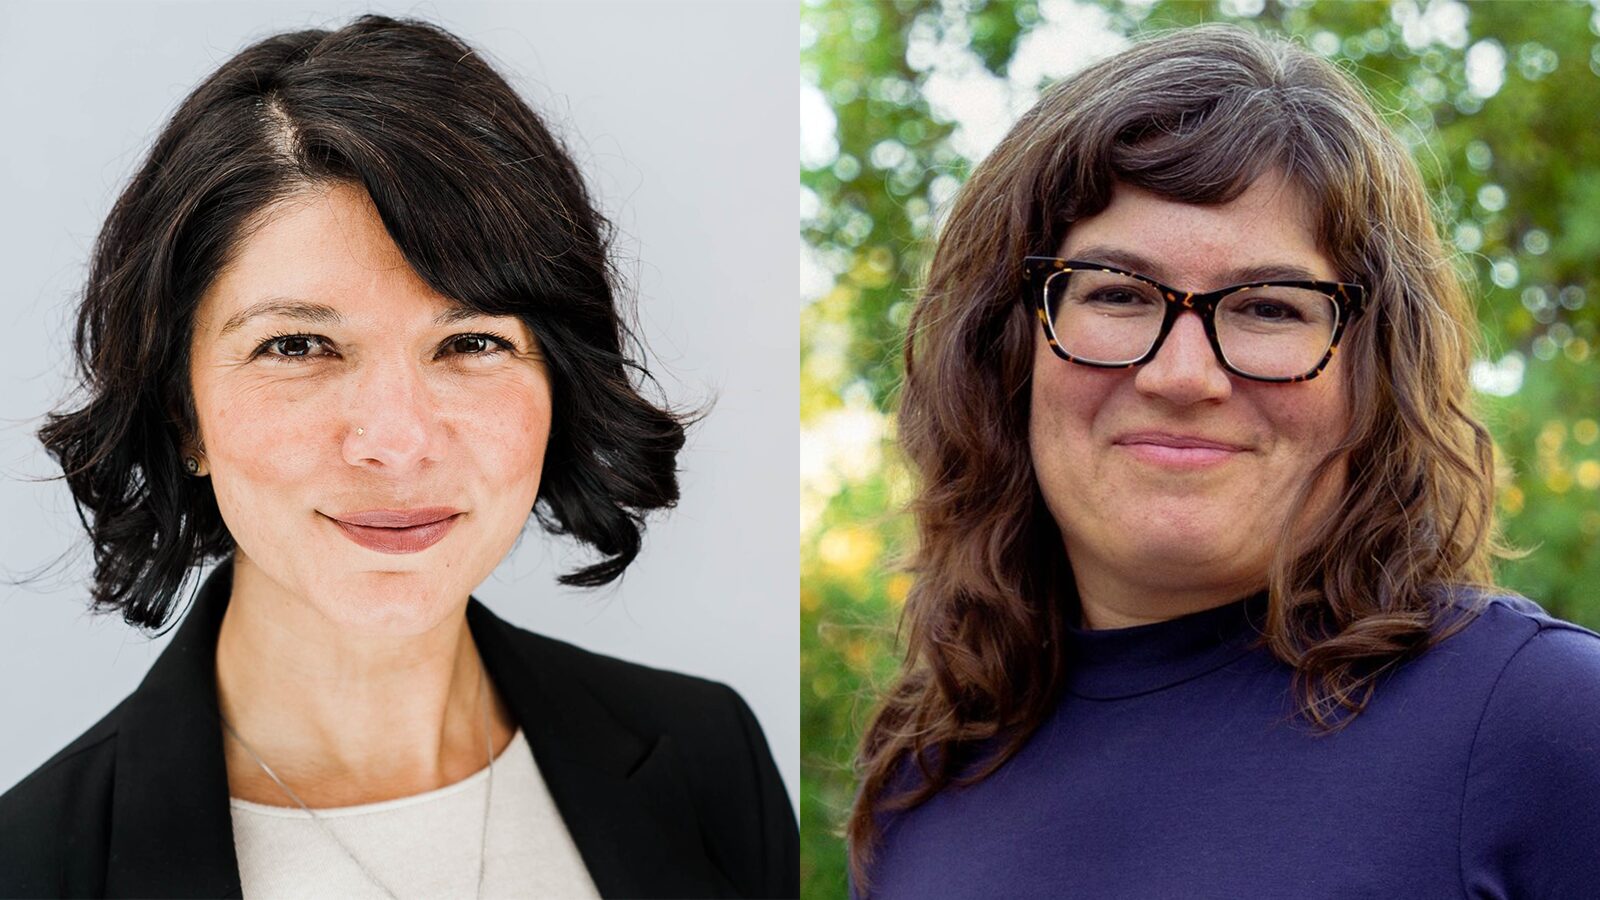 Two headshots, side by side, of Shebreh Kalantari-Johnson and Joy Schendledecker, who are facing off in the March 5 election for the District 3 Santa Cruz City Council seat.